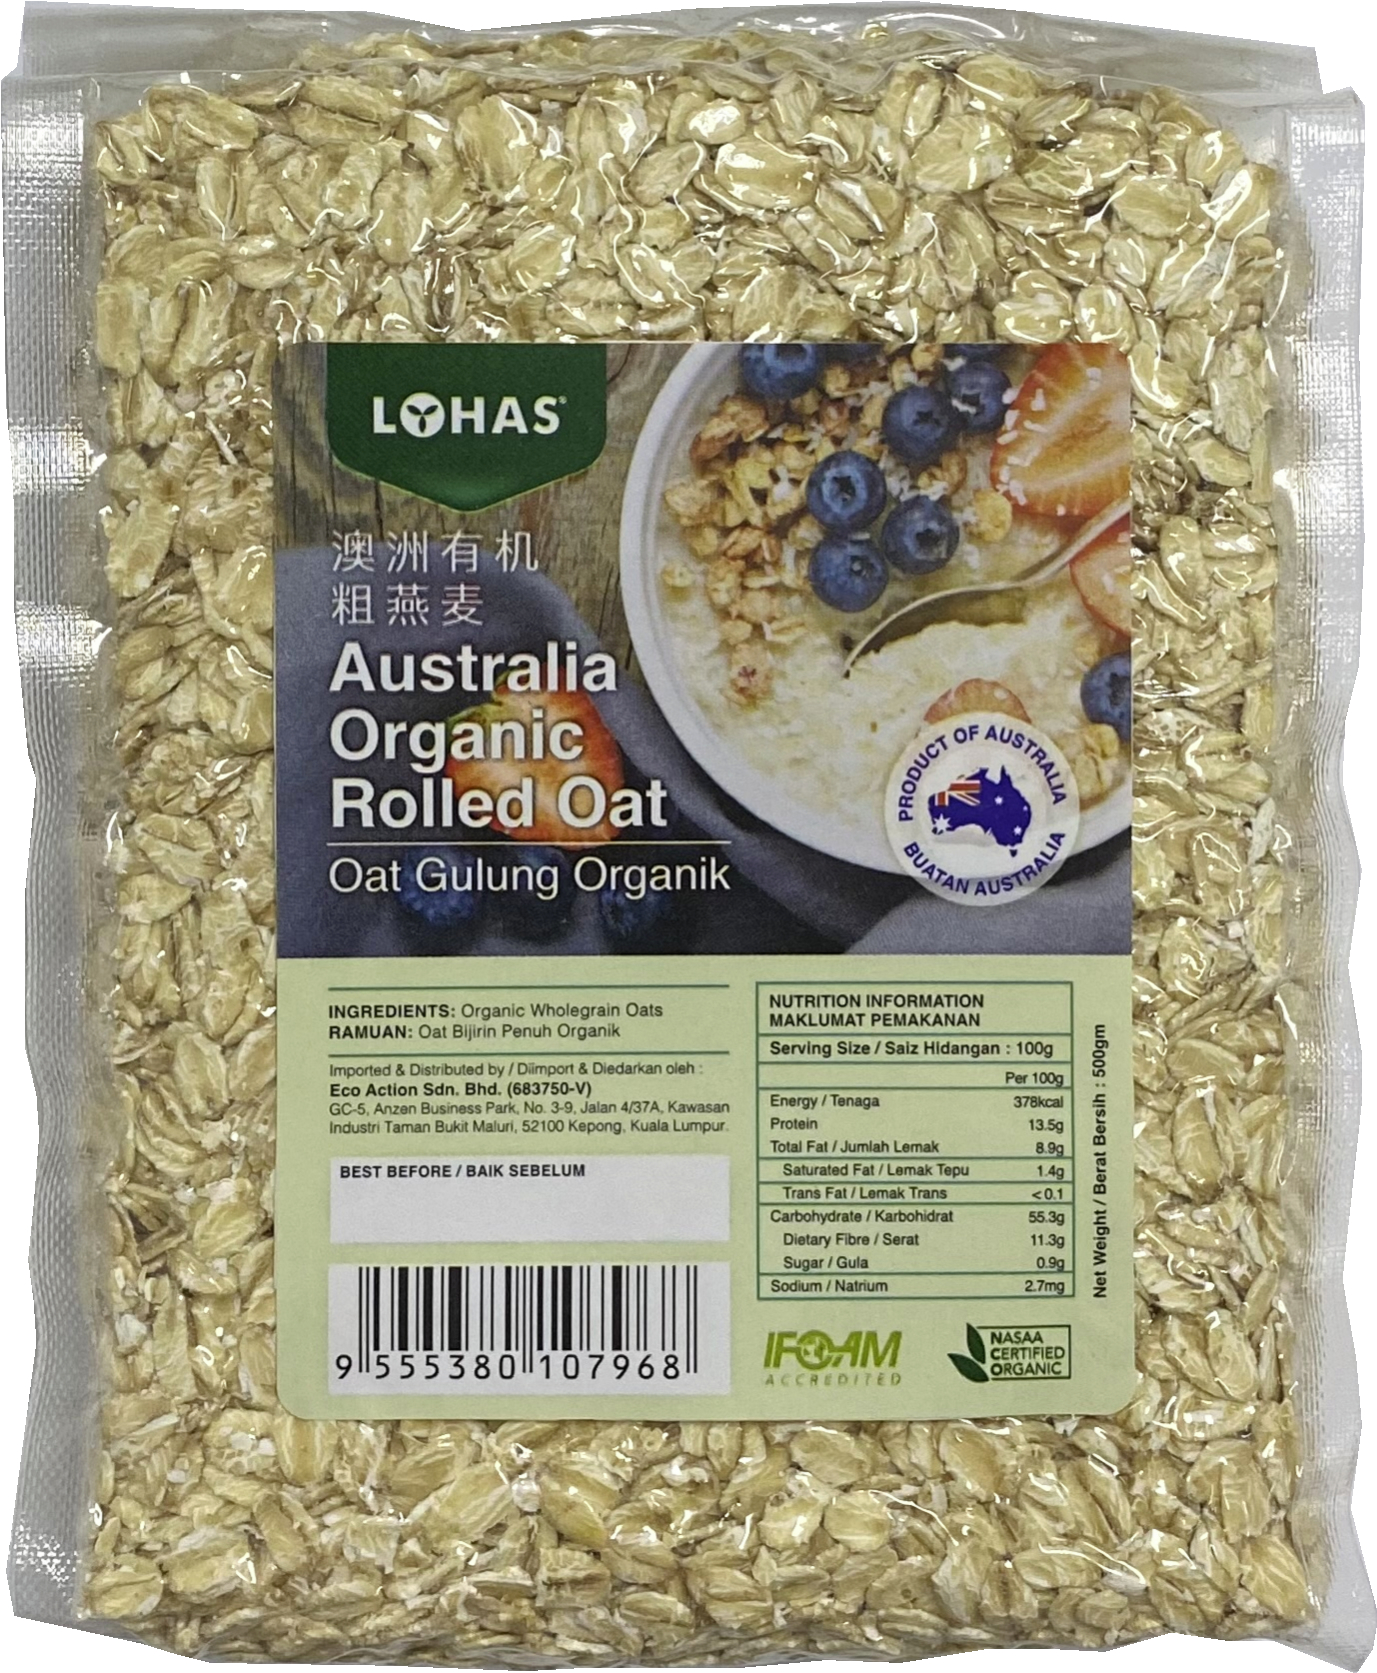 Get Organic Rolled Oats Online in Pakistan – Amna's Naturals